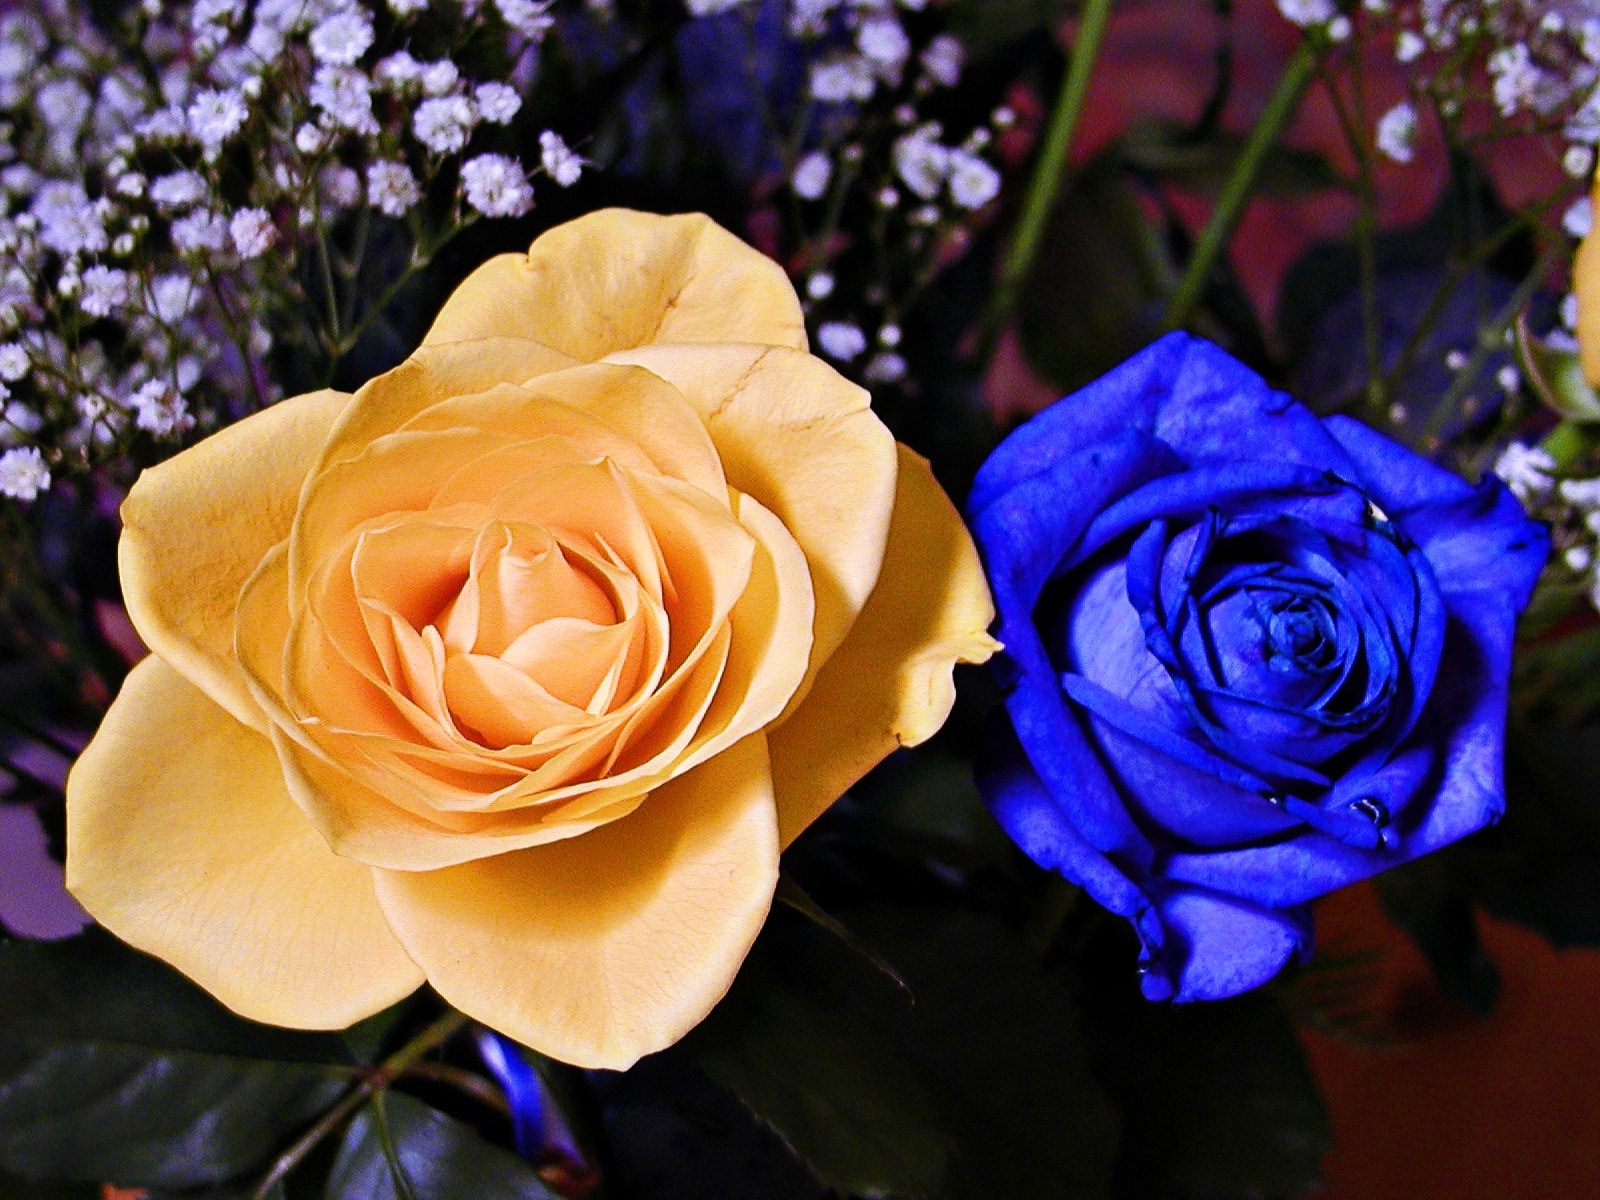 yellow petaled flower and blue petaled flower